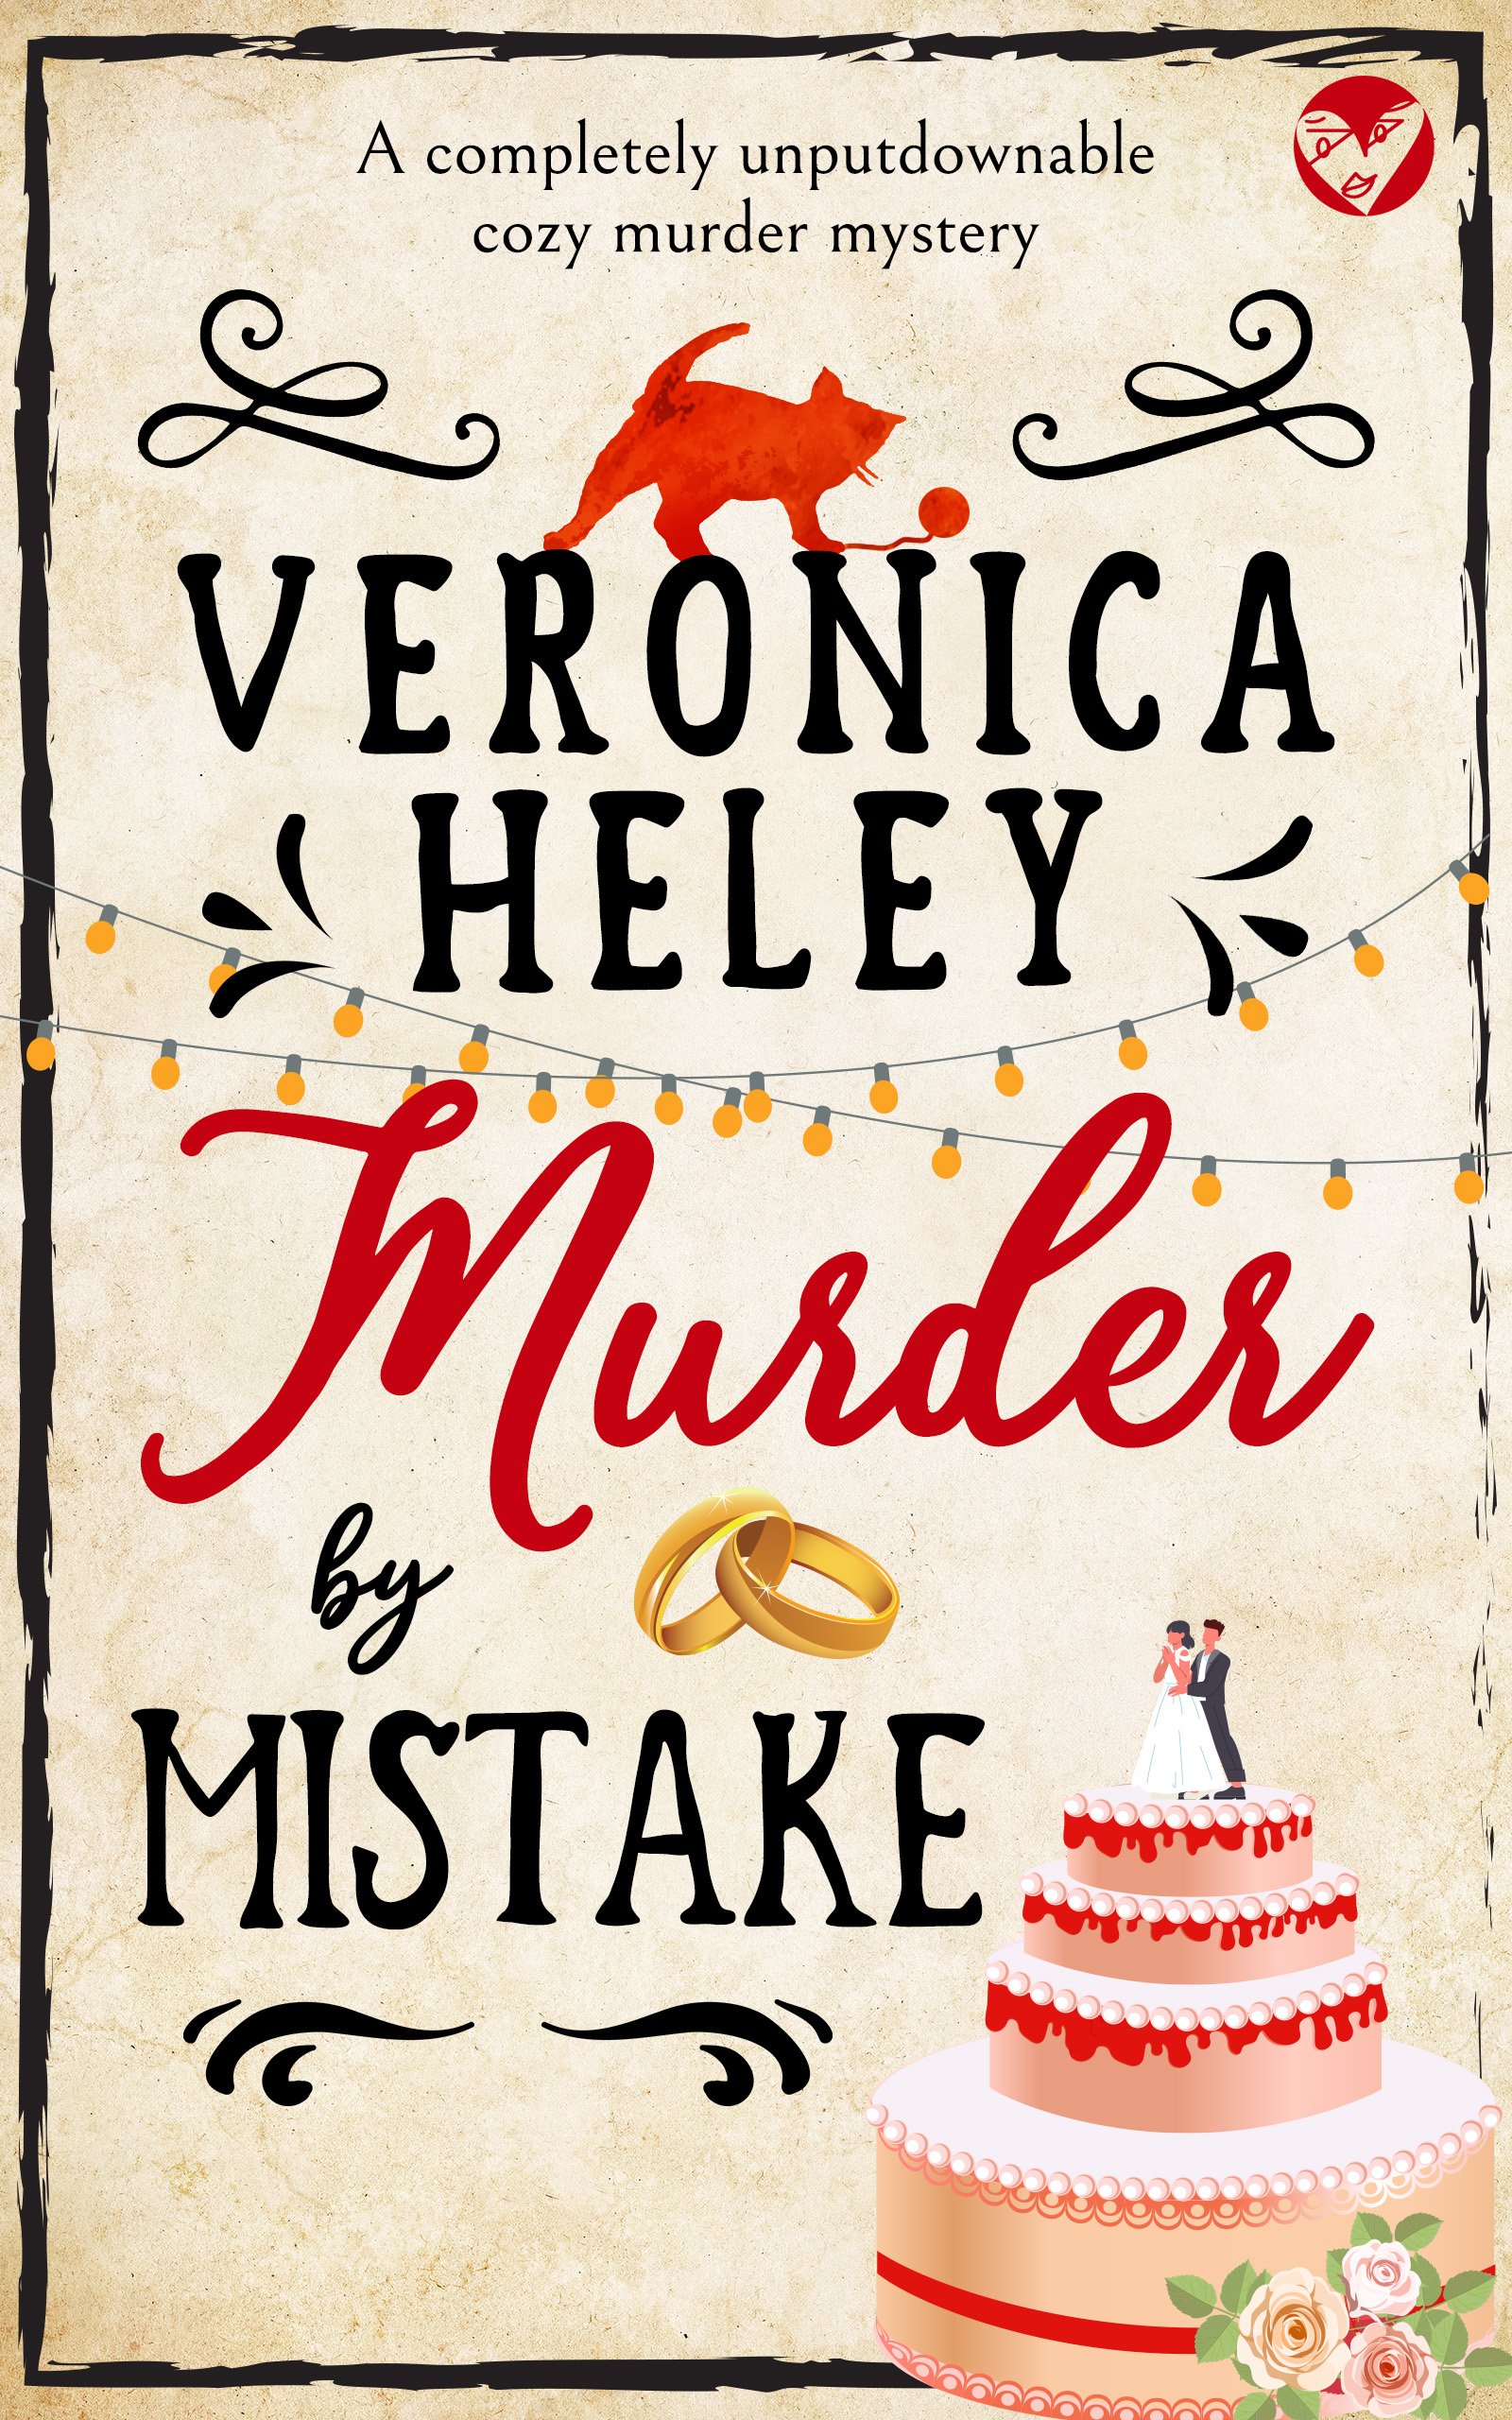 MURDER BY MISTAKE cover publish.jpg